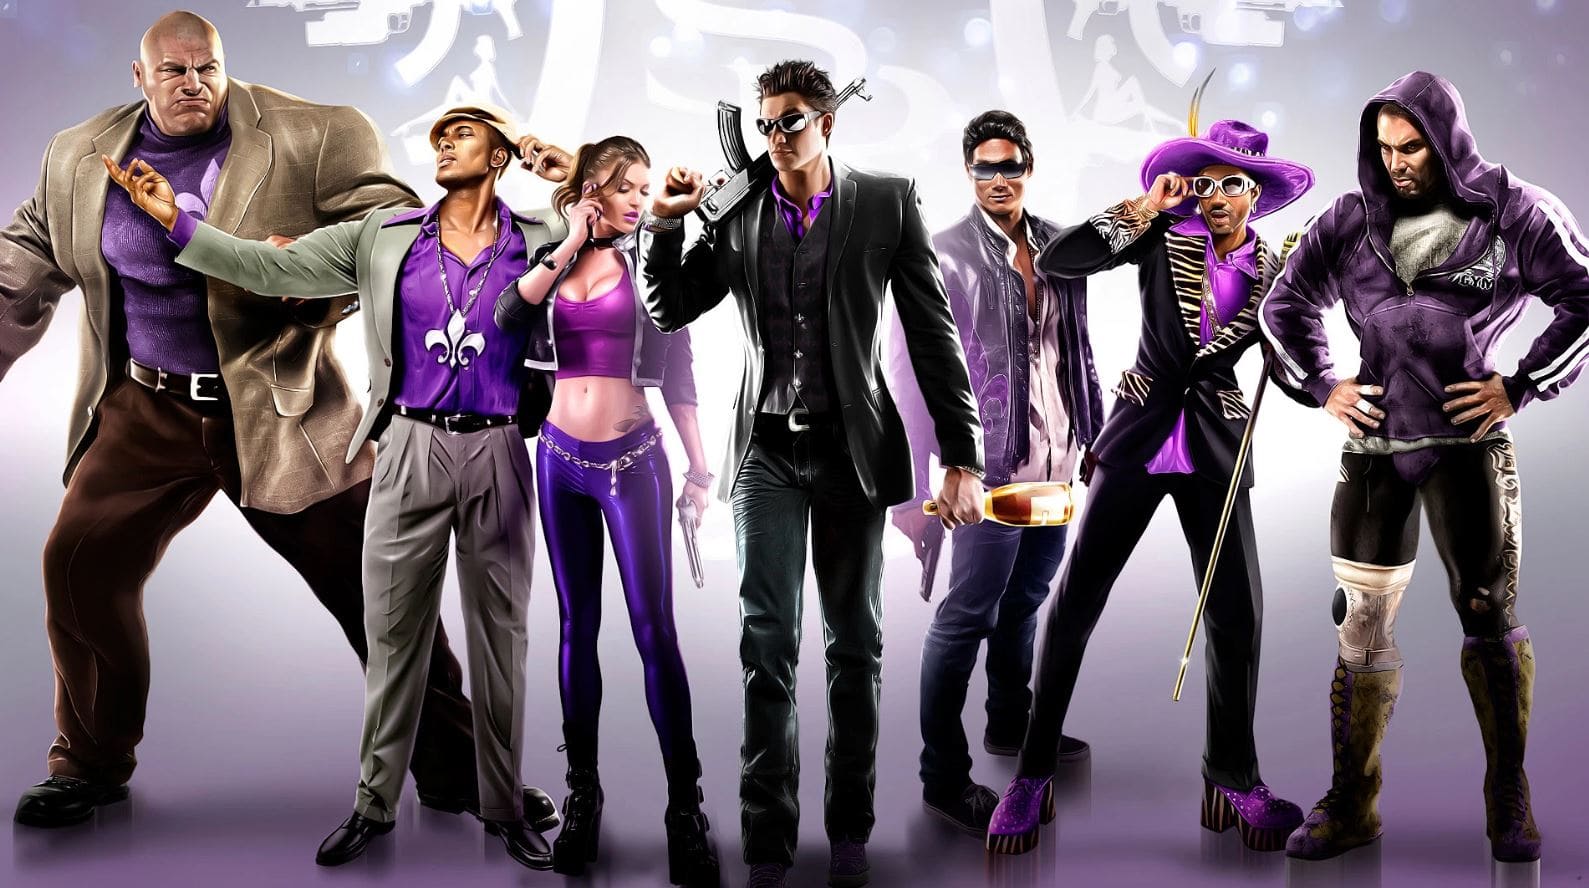 Saints Row The Third Remastered - Announce Trailer